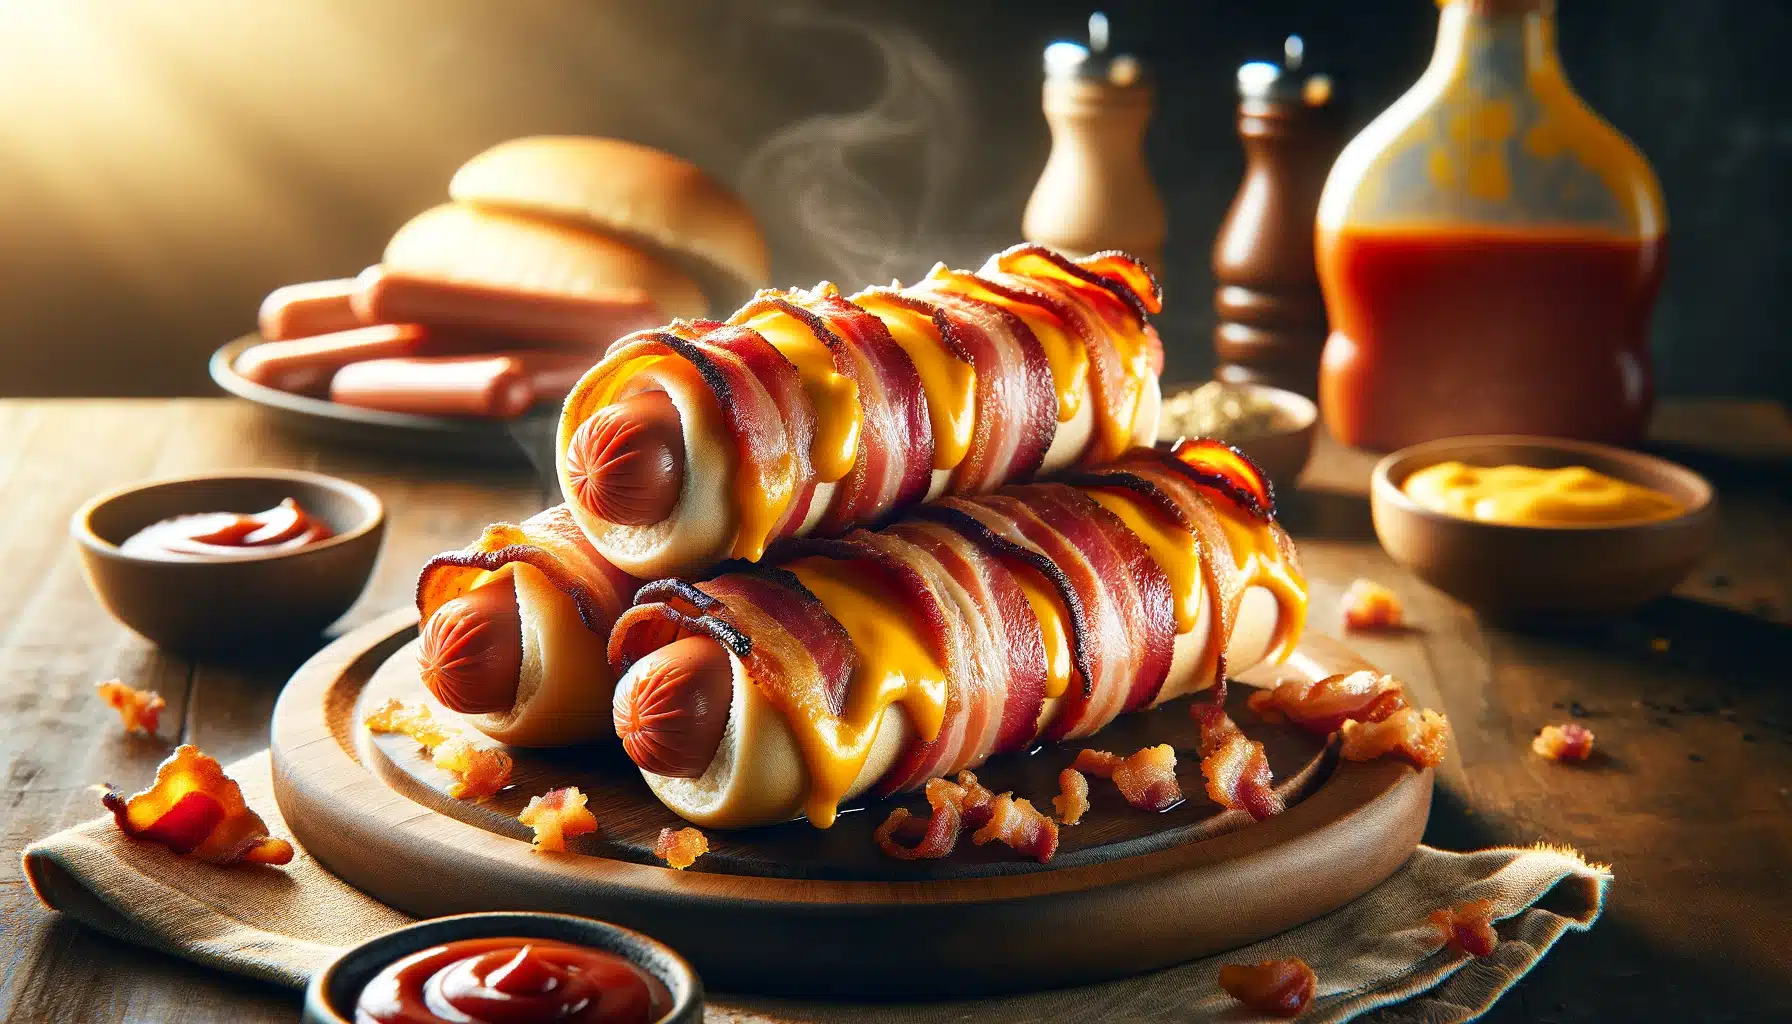 Cheese Stuffed Bacon Wrapped Hot Dogs